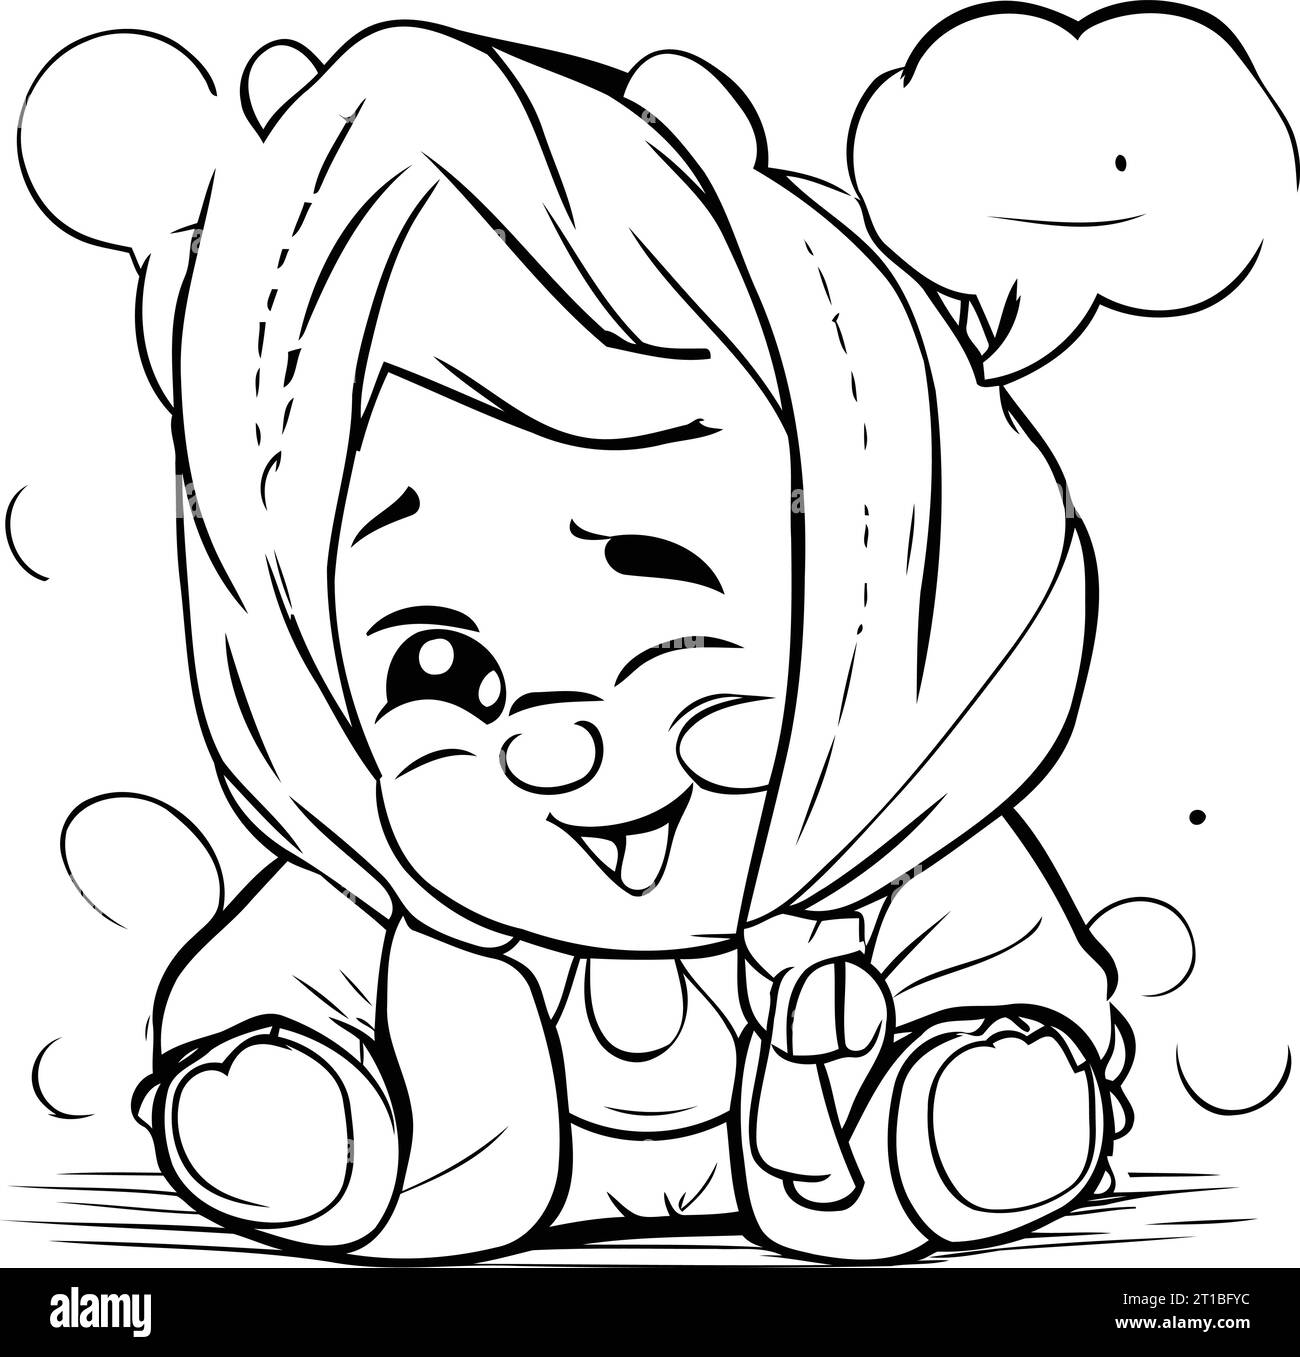 Black and White Cartoon Illustration of Cute Baby Boy Character Wearing Hoodie for Coloring Book Stock Vector